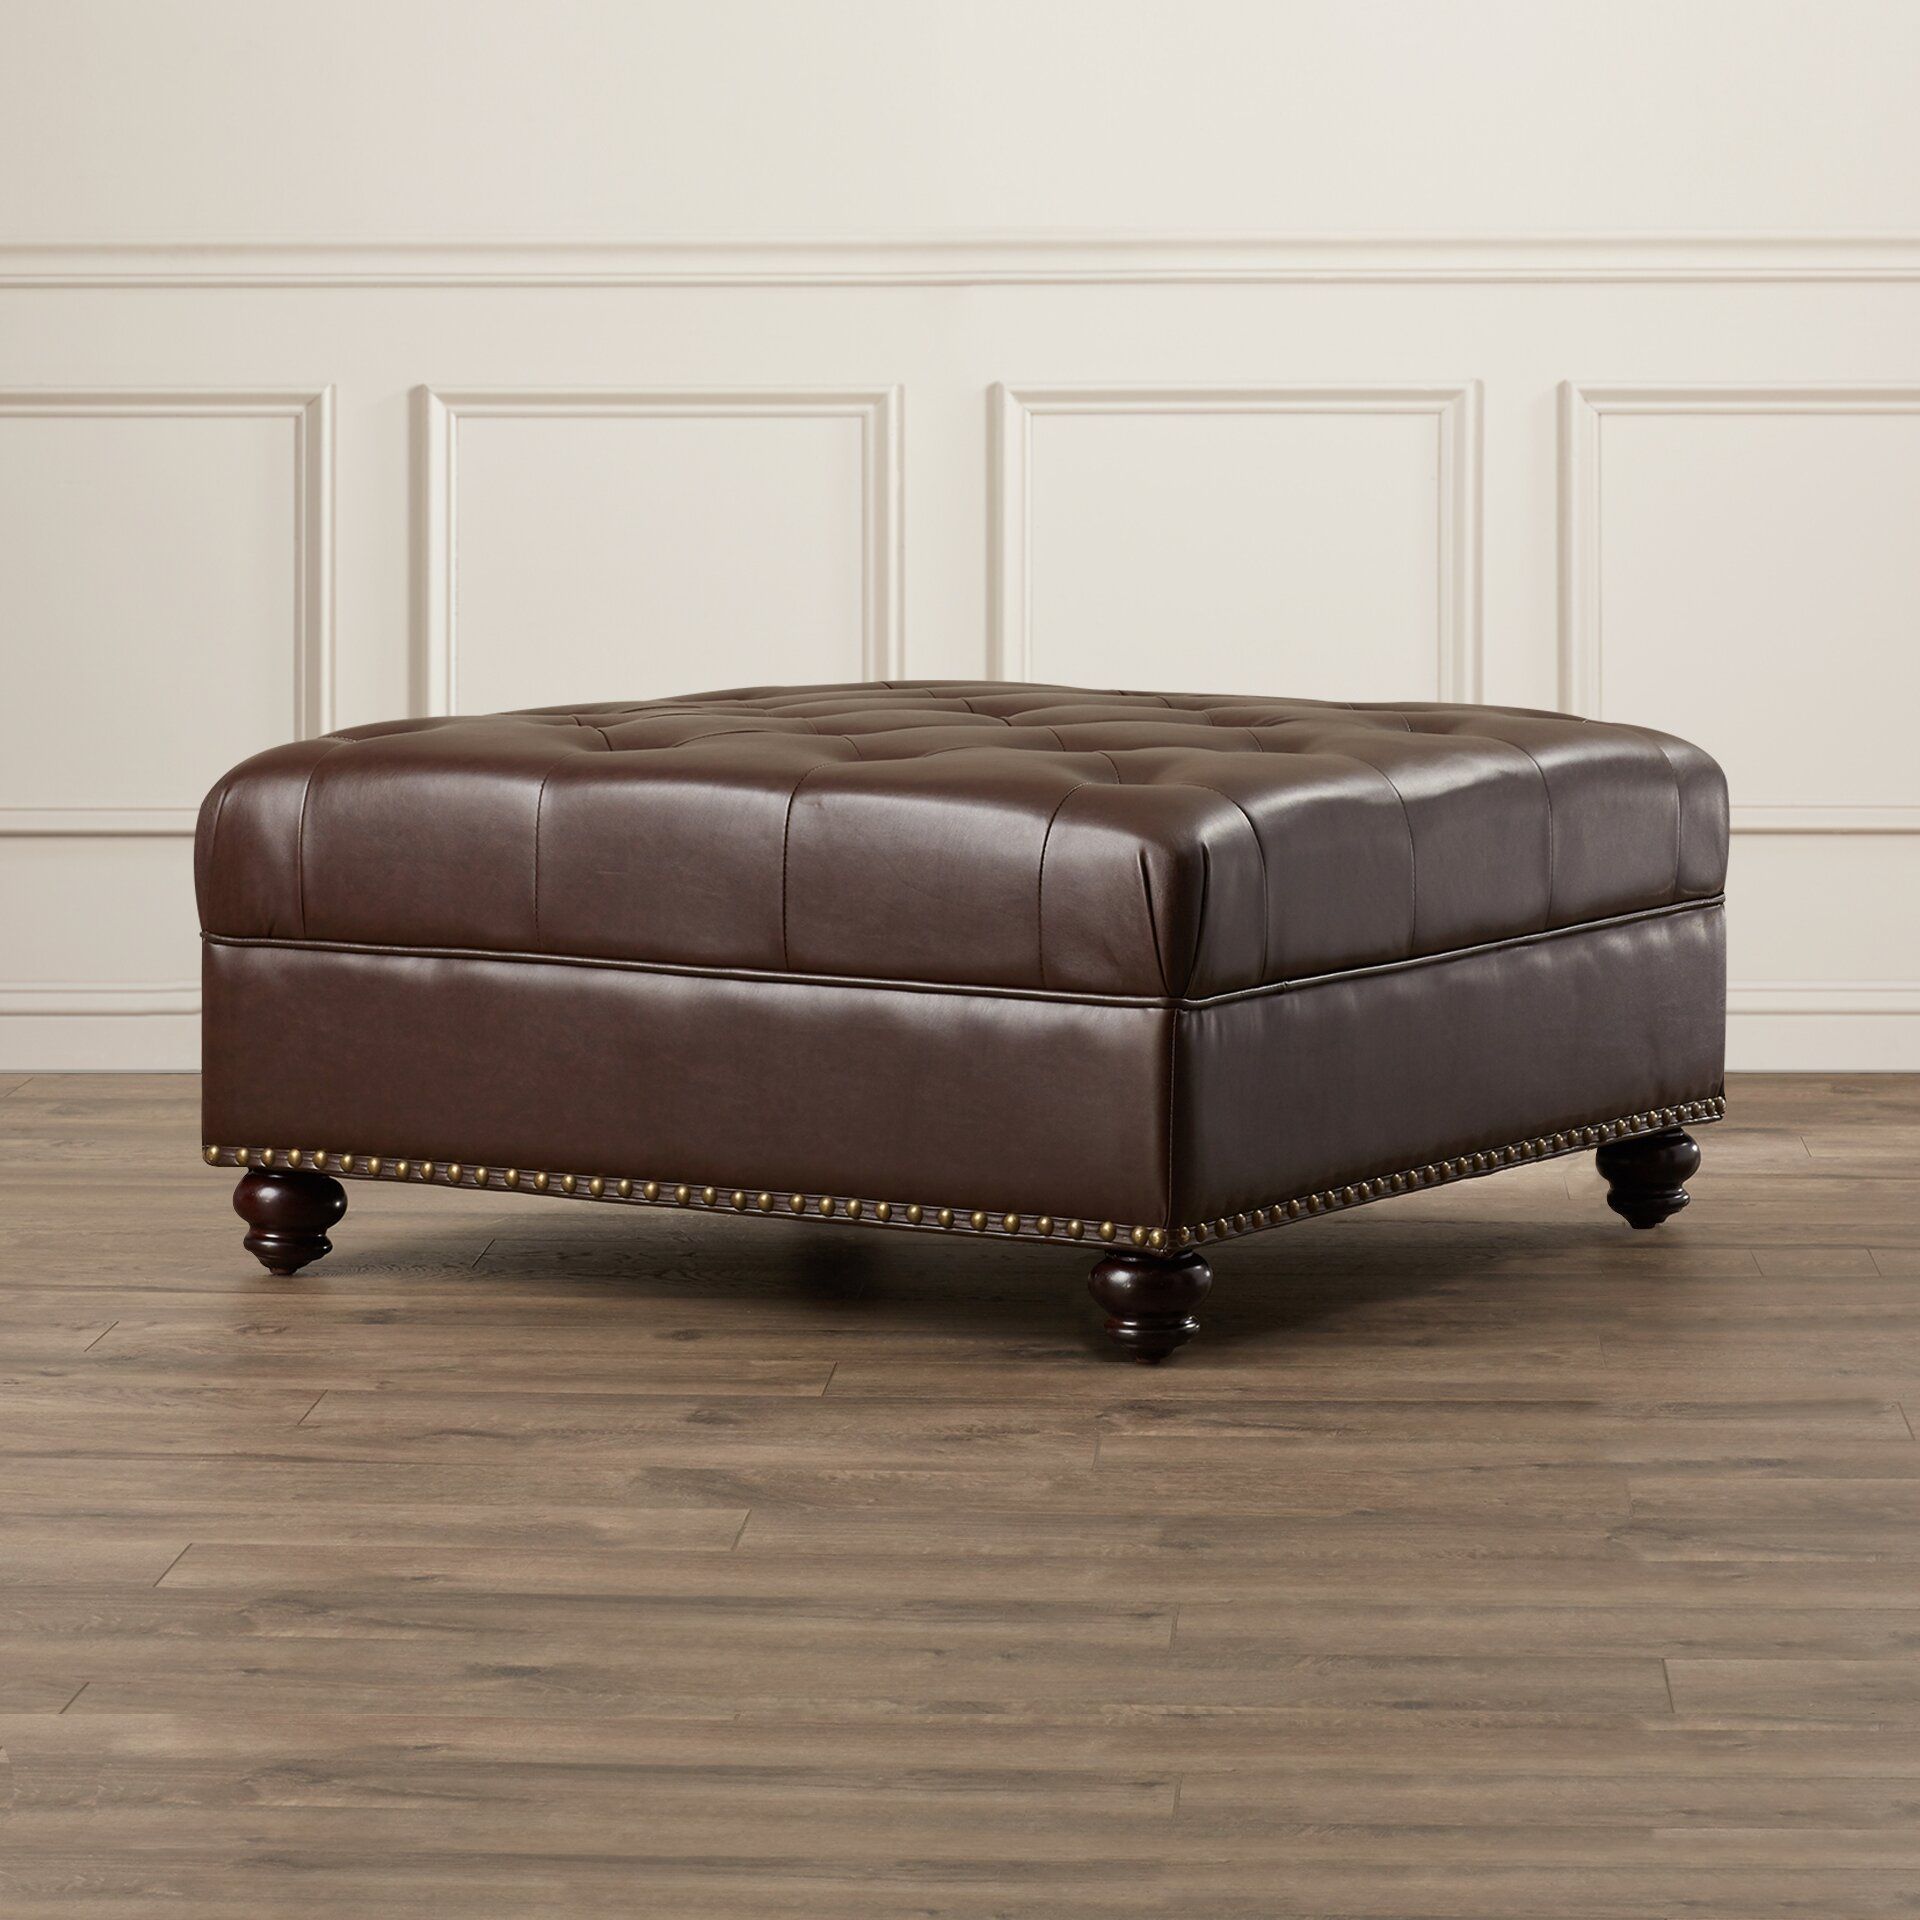 Darby Home Co Westview Tufted Ottoman & Reviews | Wayfair With Tufted Ottomans (View 2 of 20)